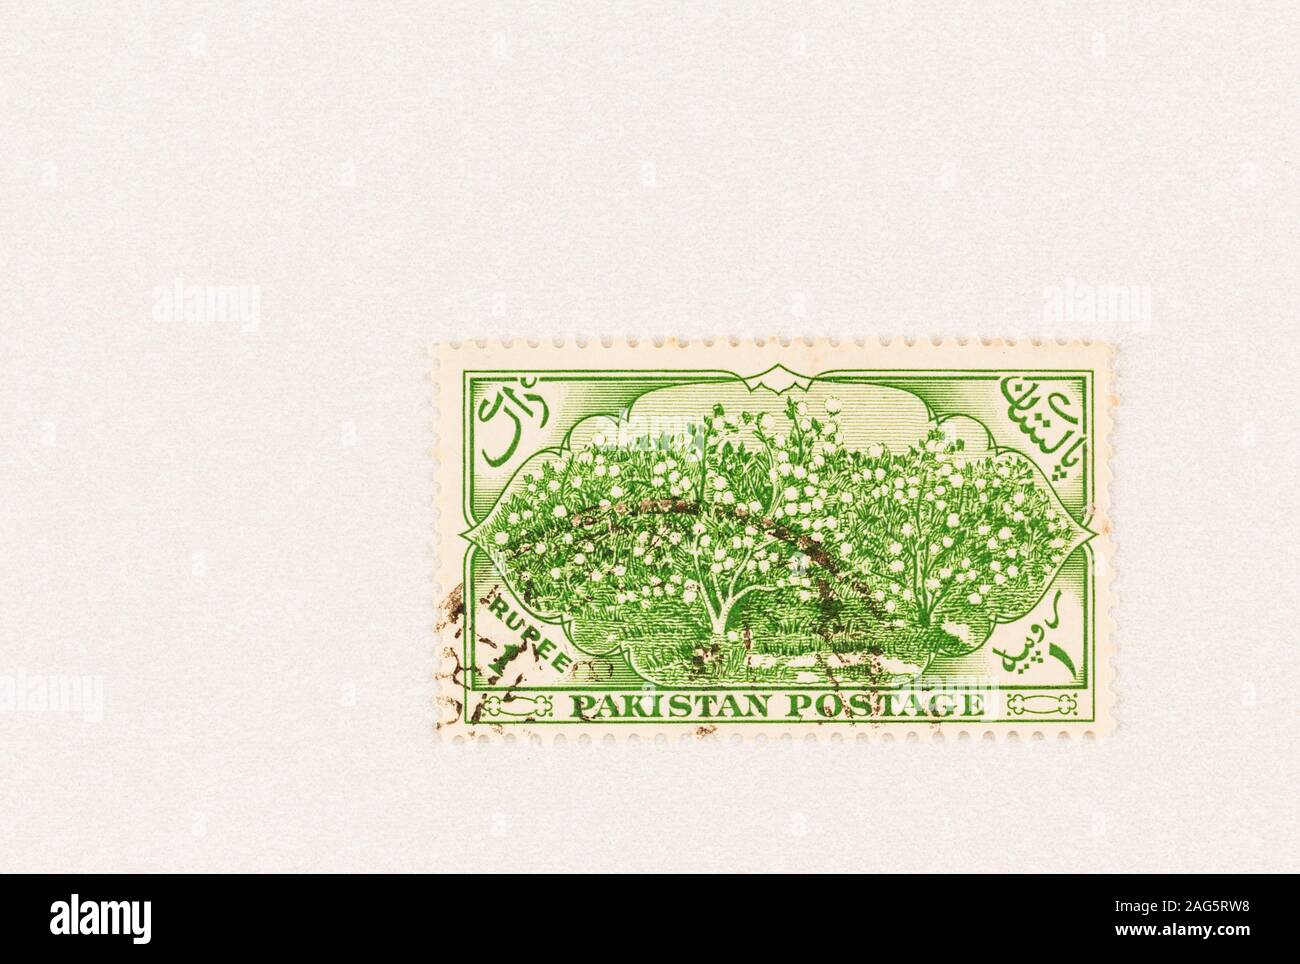 SEATTLE WASHINGON - October 5, 2019: Cotton plantation on Pakistan postage stamp, issued in 1954. Green stamp with cotton plant. Scott #71, Stock Photo